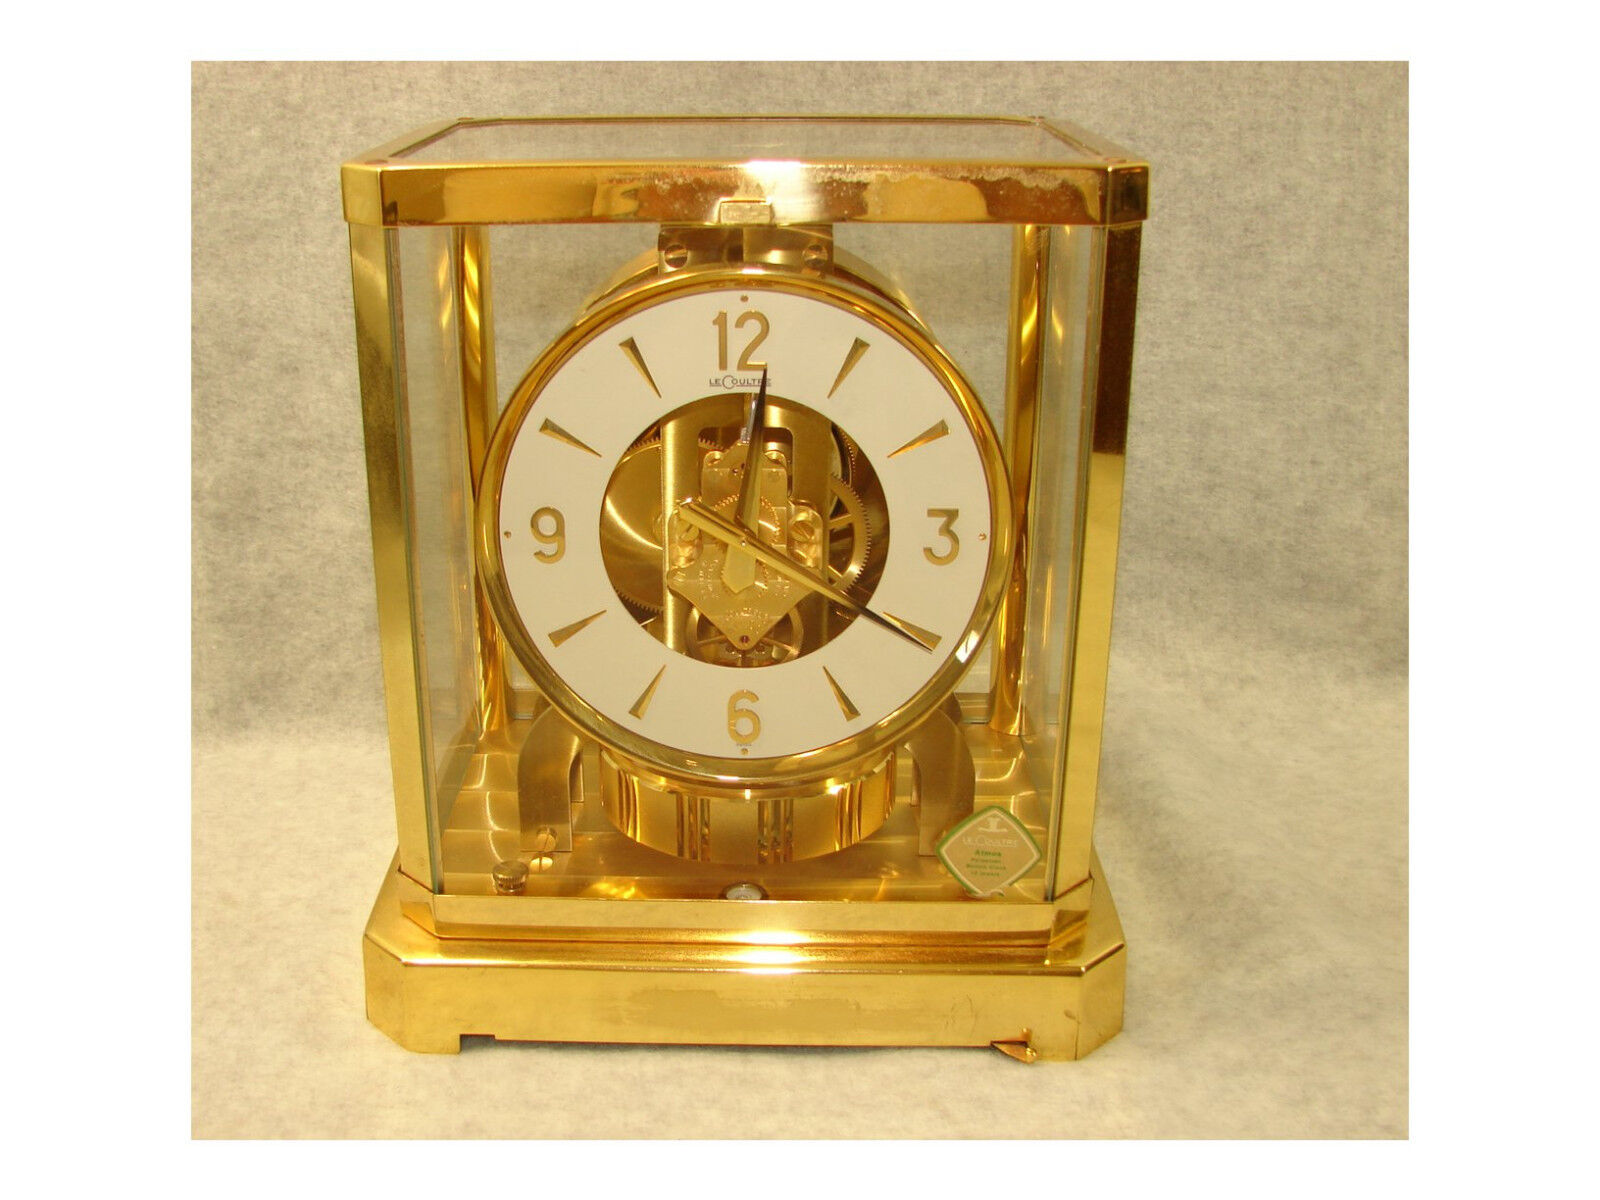 ATMOS MANTEL CLOCK SWISS LE COULTRE 15 JEWEL PERPETUAL MOTION 528-8